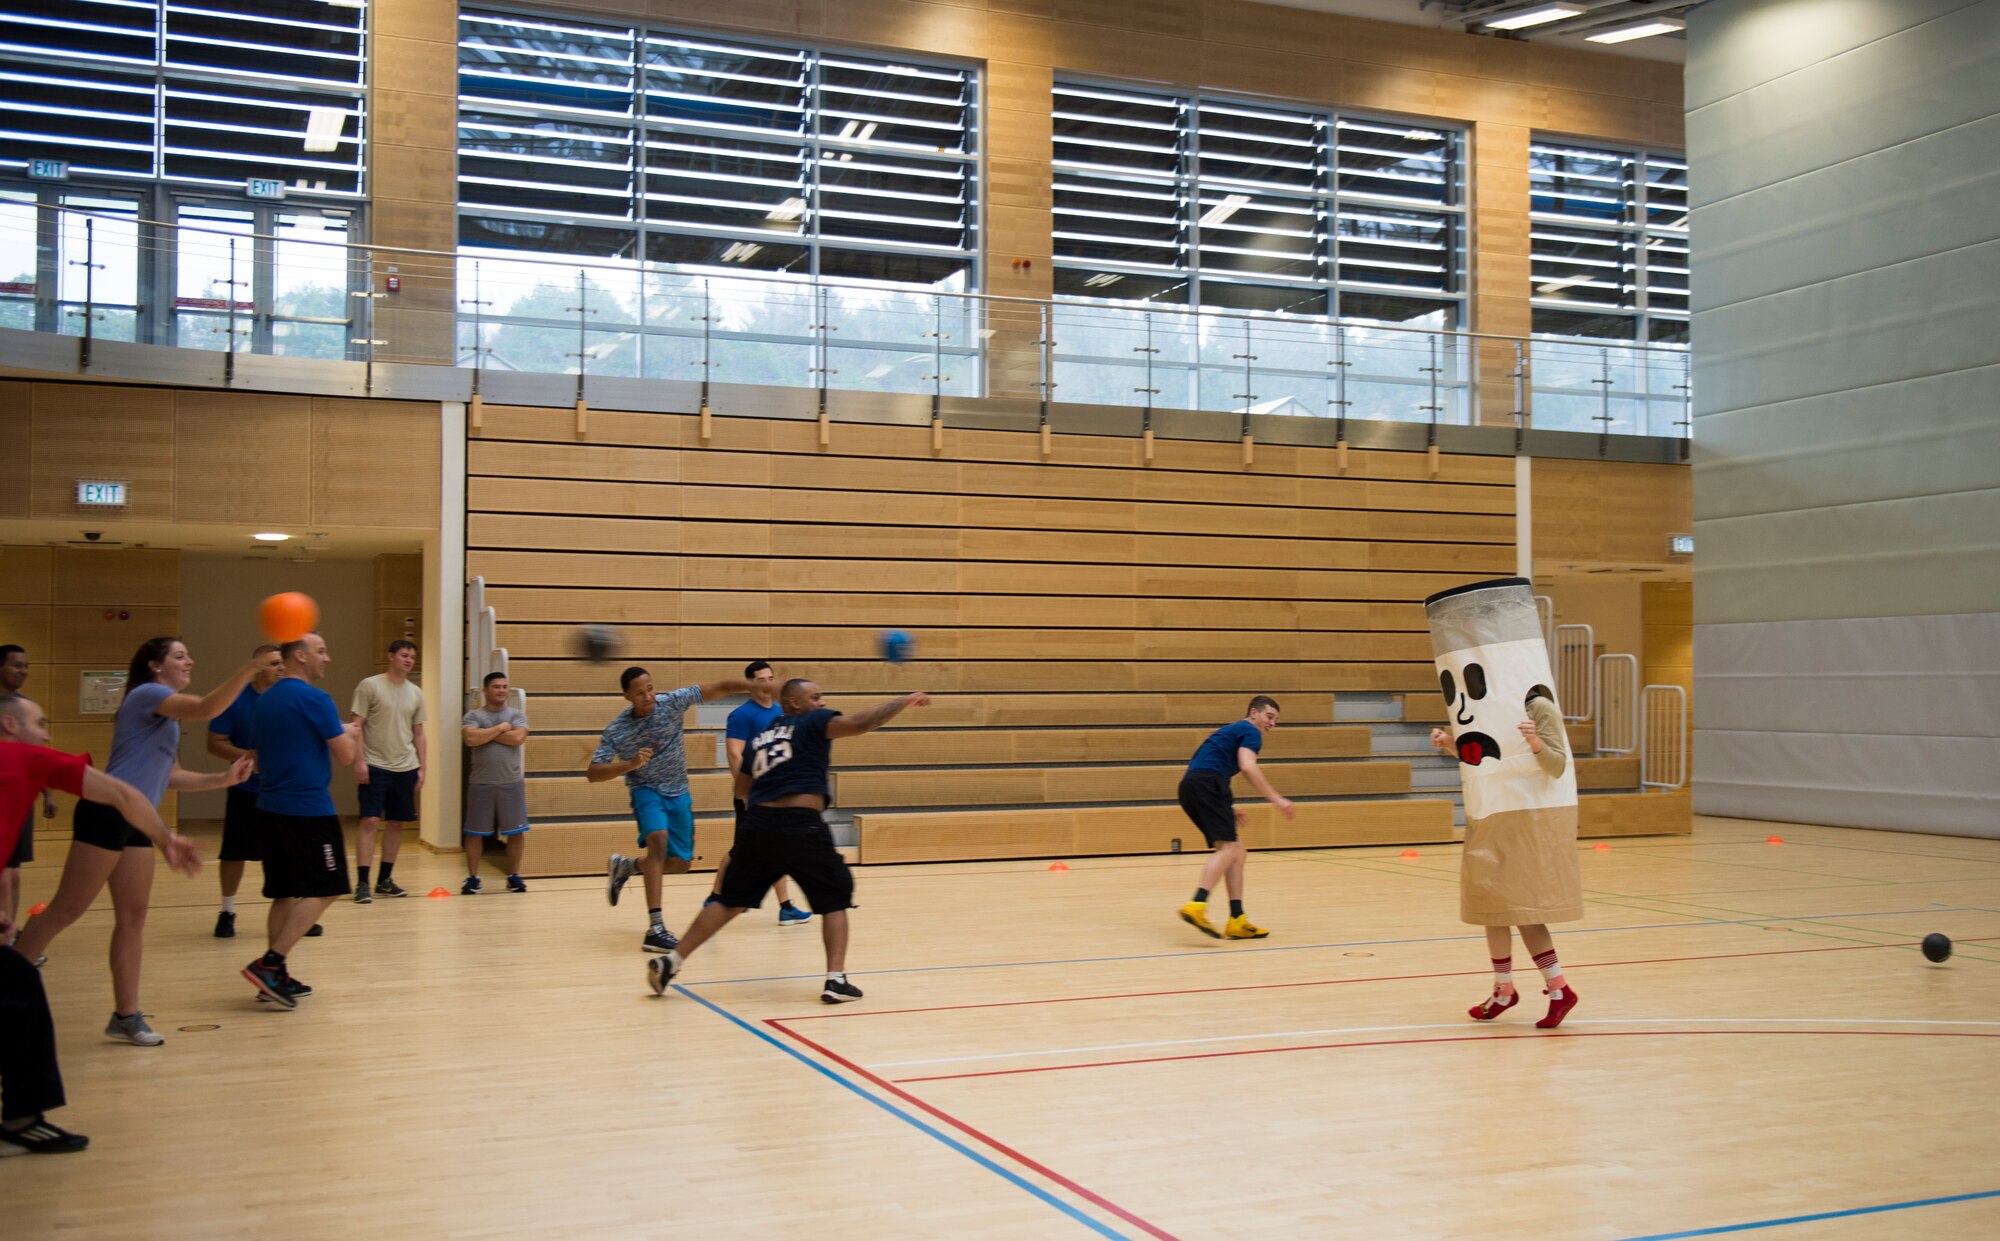 Airmen pummel a cigarette mascot with dodgeballs to warm up for the RUFit Dodgeball Tournament in the fitness center Dec. 11, 2015, at Spangdahlem Air Base, Germany. Information booths from the four pillars of RUFit, social, mental, spiritual and physical, were set up to provide information to the players during the games. (U.S. Air Force photo by Staff Sgt. Christopher Ruano/Released)